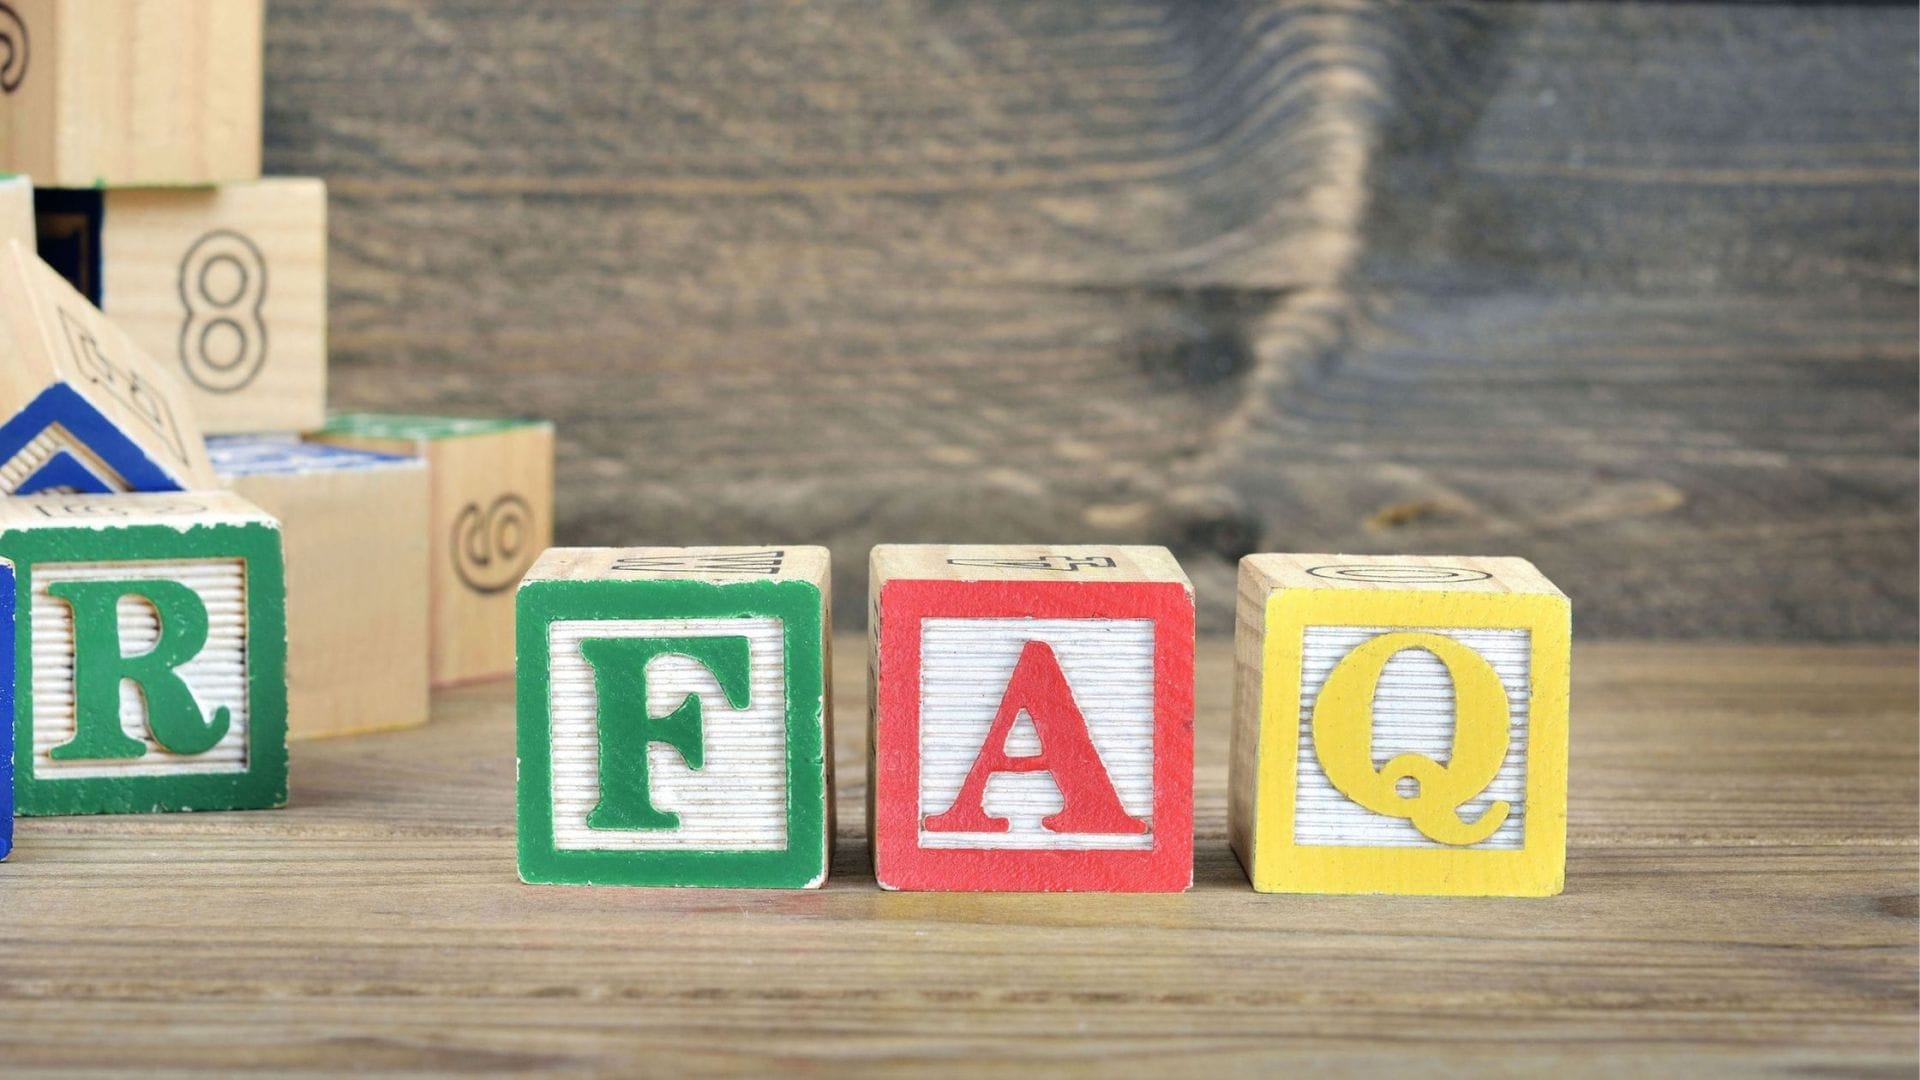 Colorful wooden blocks spelling out 'FAQ' on a textured wooden surface, symbolizing frequently asked questions about renal cancer treatment costs. The blocks are in focus in the foreground with a blurred stack of other blocks in the background, suggesting a resource for information and answers.